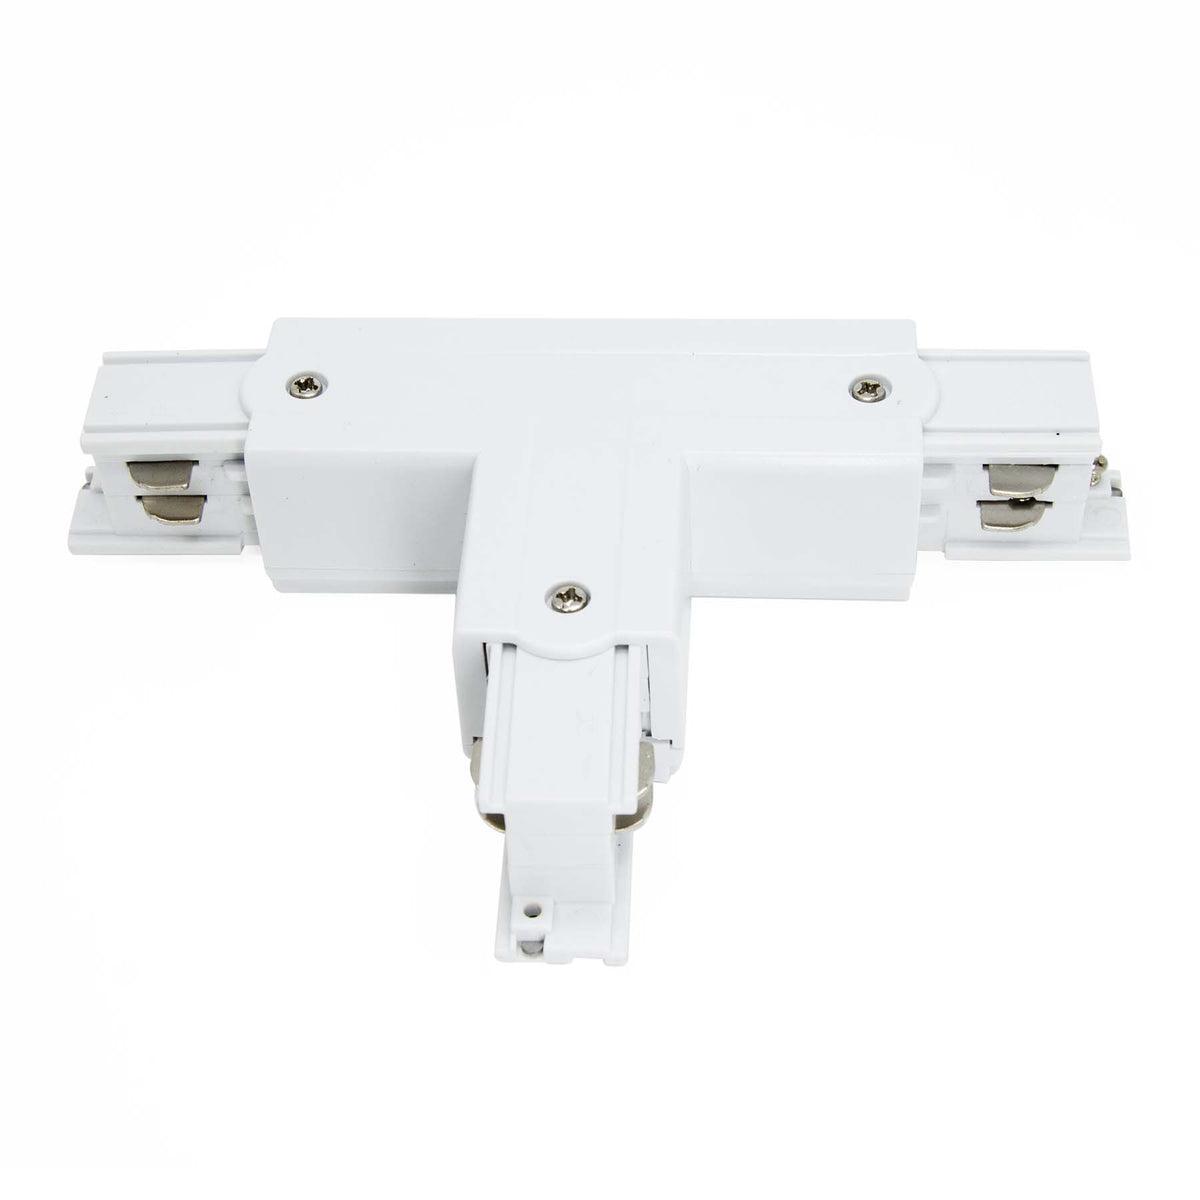 G.W.S LED Wholesale Ltd. 3 Circuits / White T Shape Connector For LED Track Light